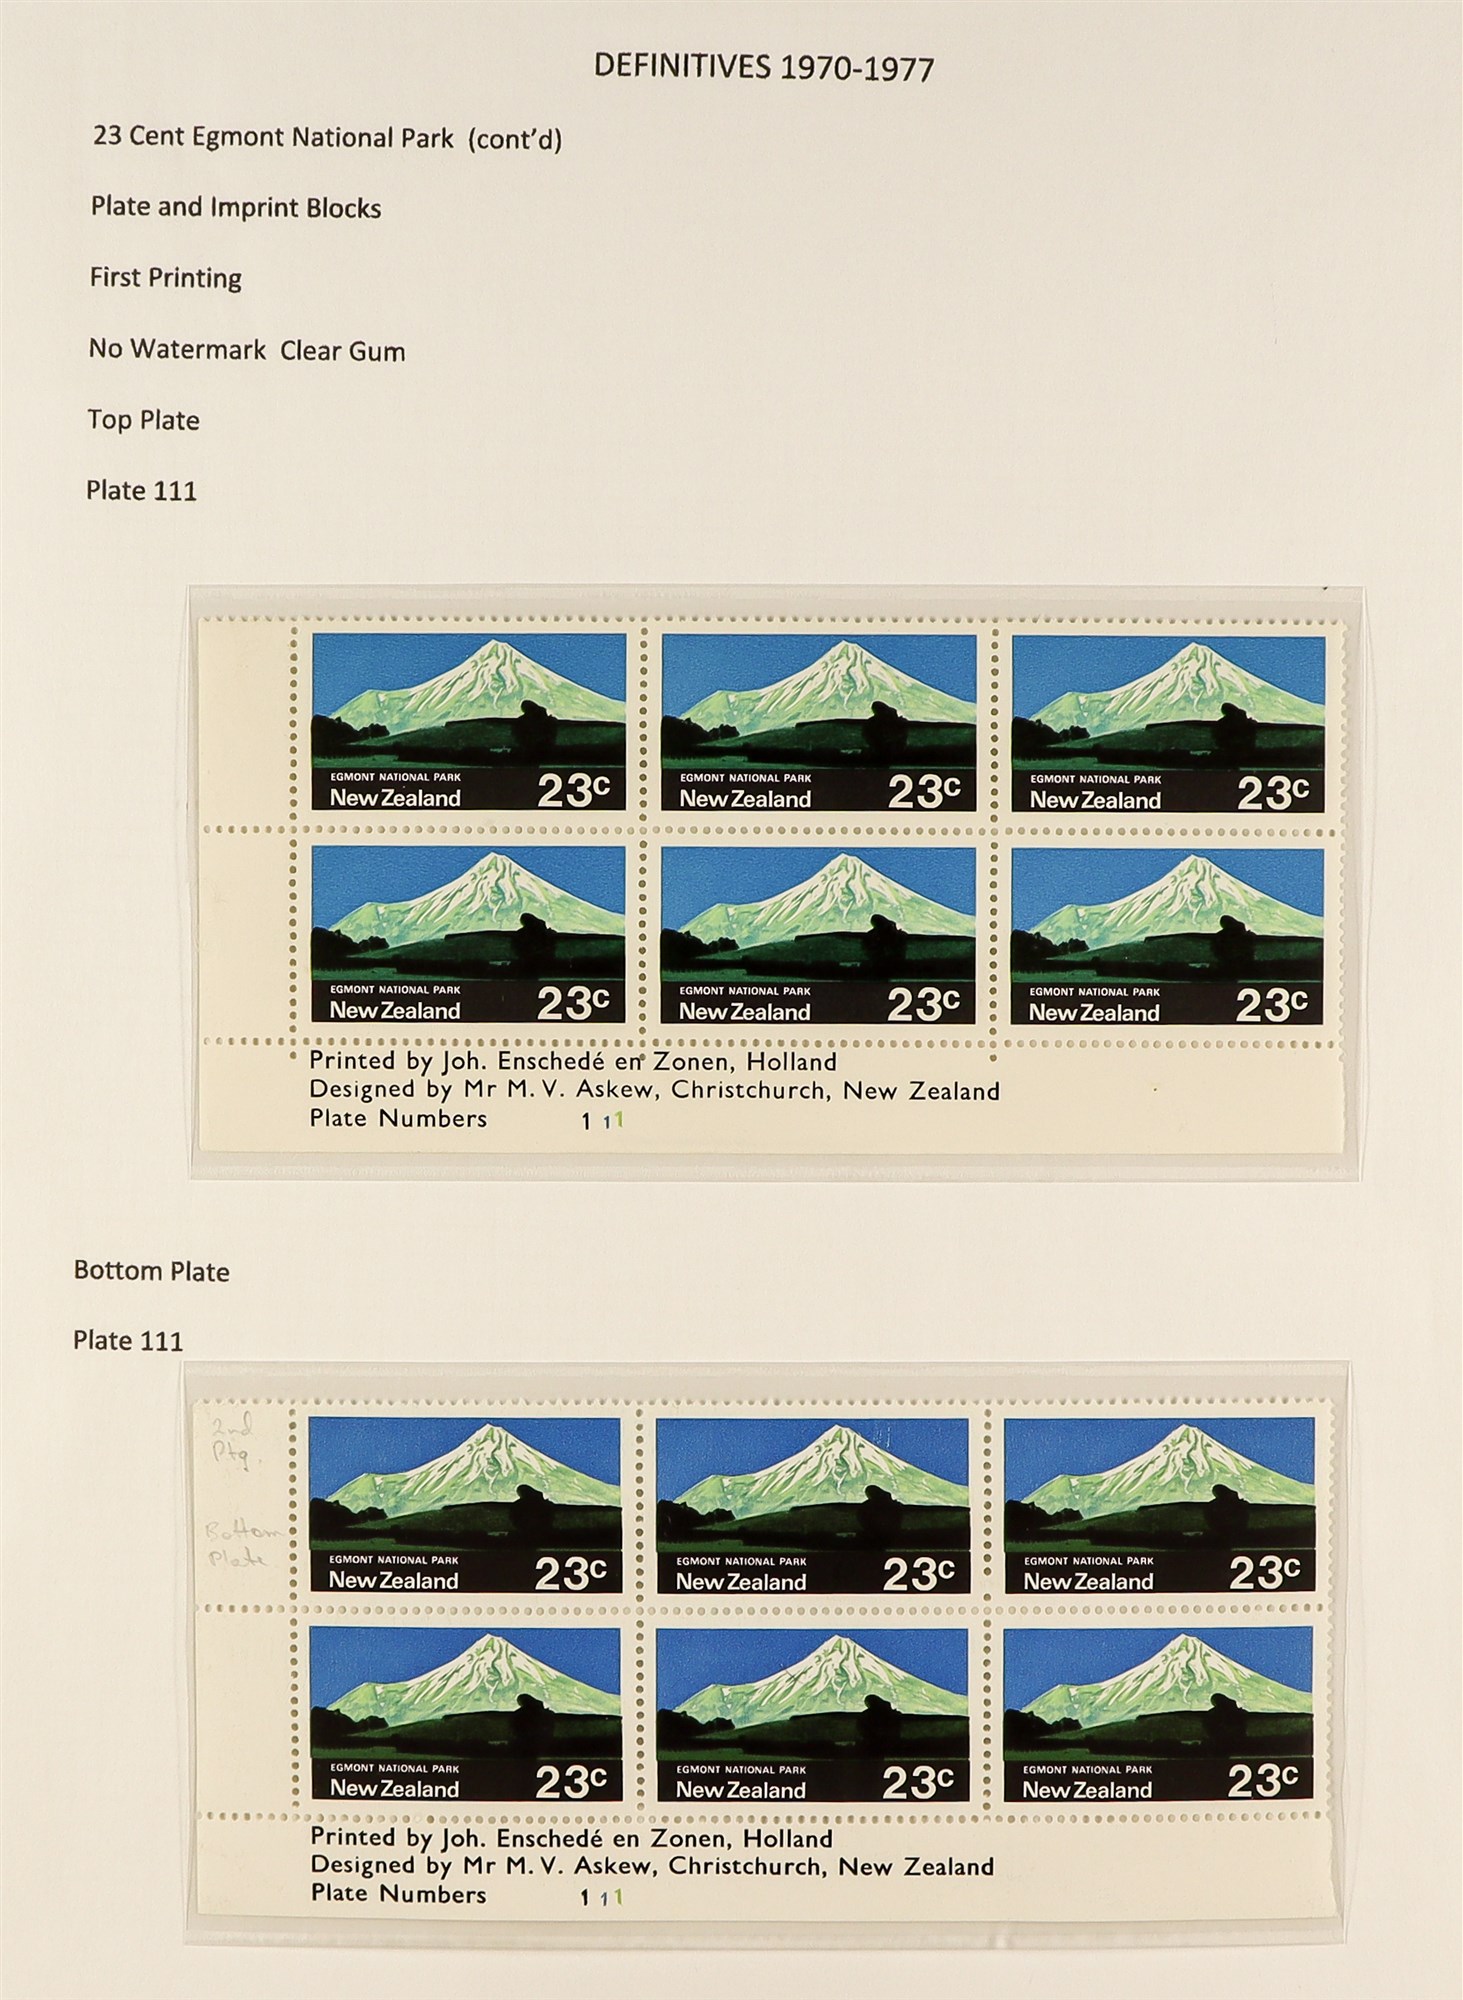 NEW ZEALAND 1970 - 1976 PICTORIALS SPECIALIZED COLLECTION of 110+ never hinged mint plate + - Image 6 of 11